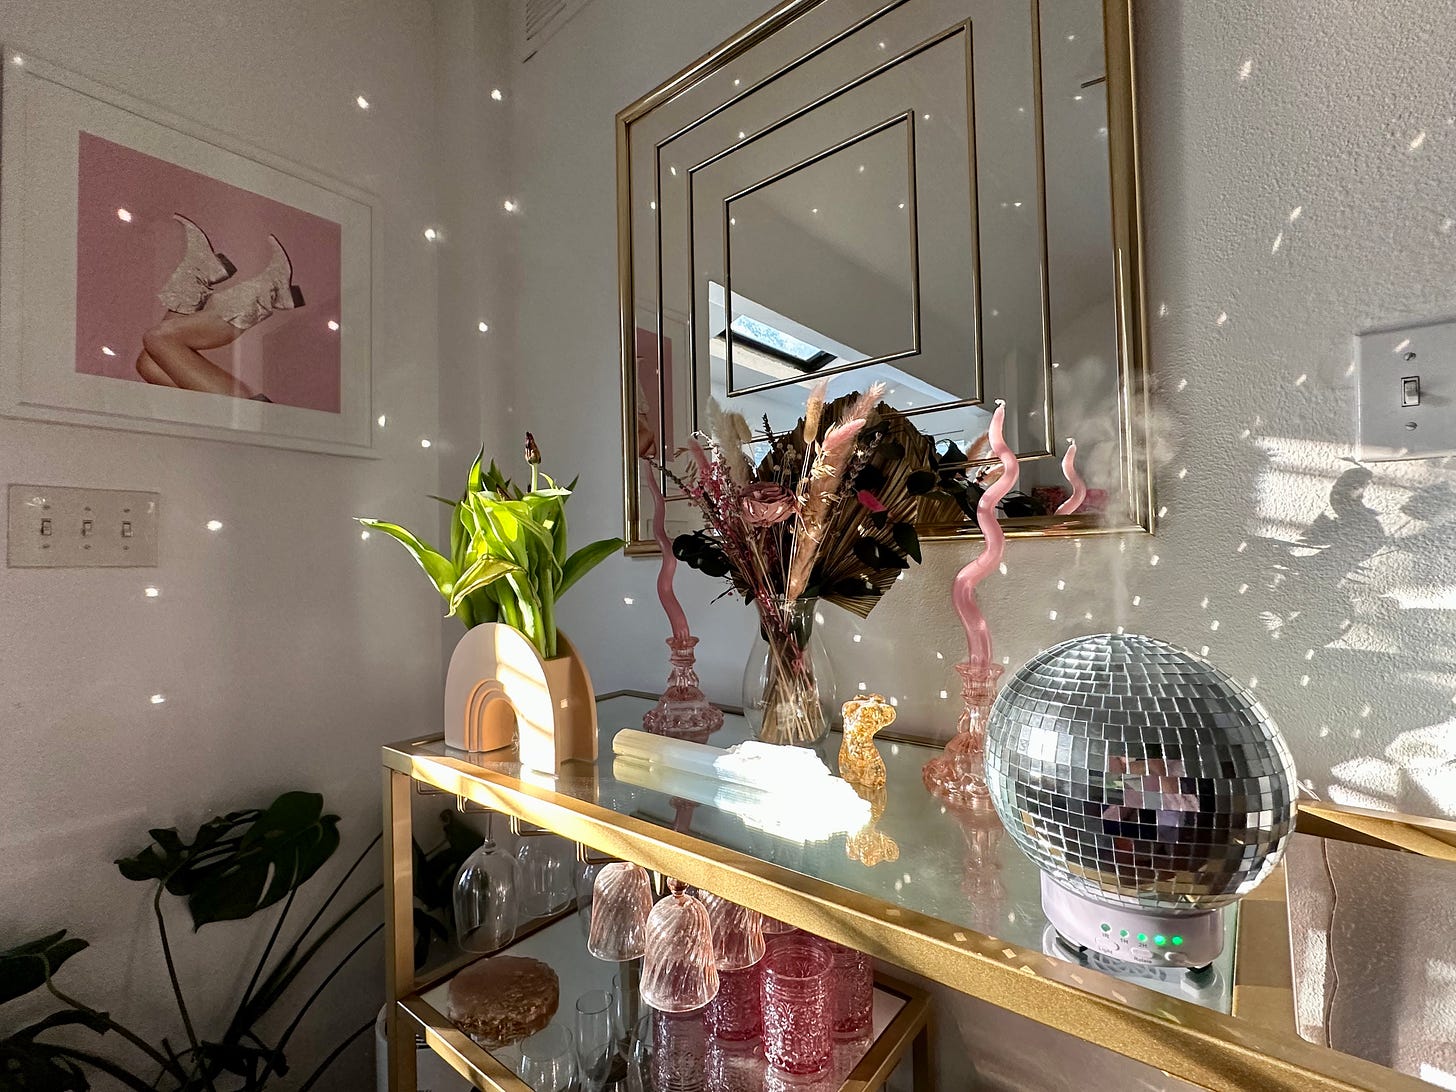 A vase with flowers, a clear crystal, two pink curvy candlesticks, and s disco ball oil diffuser sit on top of a mirrored bar cart with gold edges in a living room with a square golden mirror and an image of a woman kicking up cowboy boots on the wall.